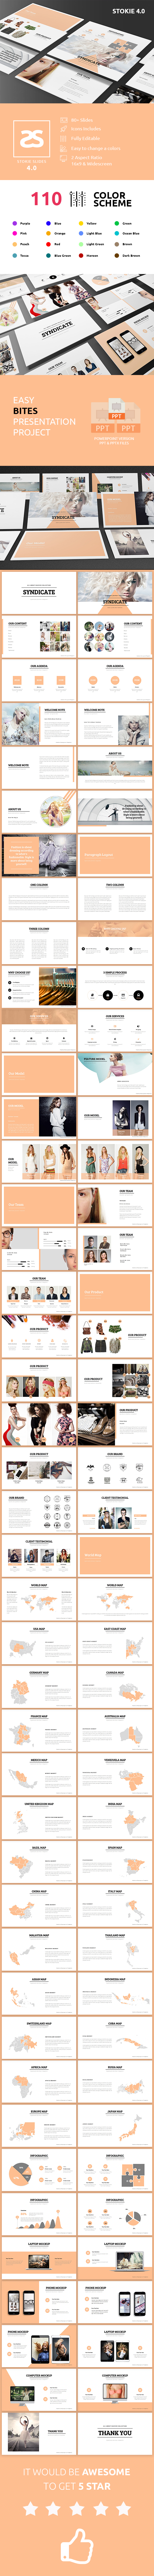 GraphicRiver Fashion Powerpoint Template 4.0 20835375